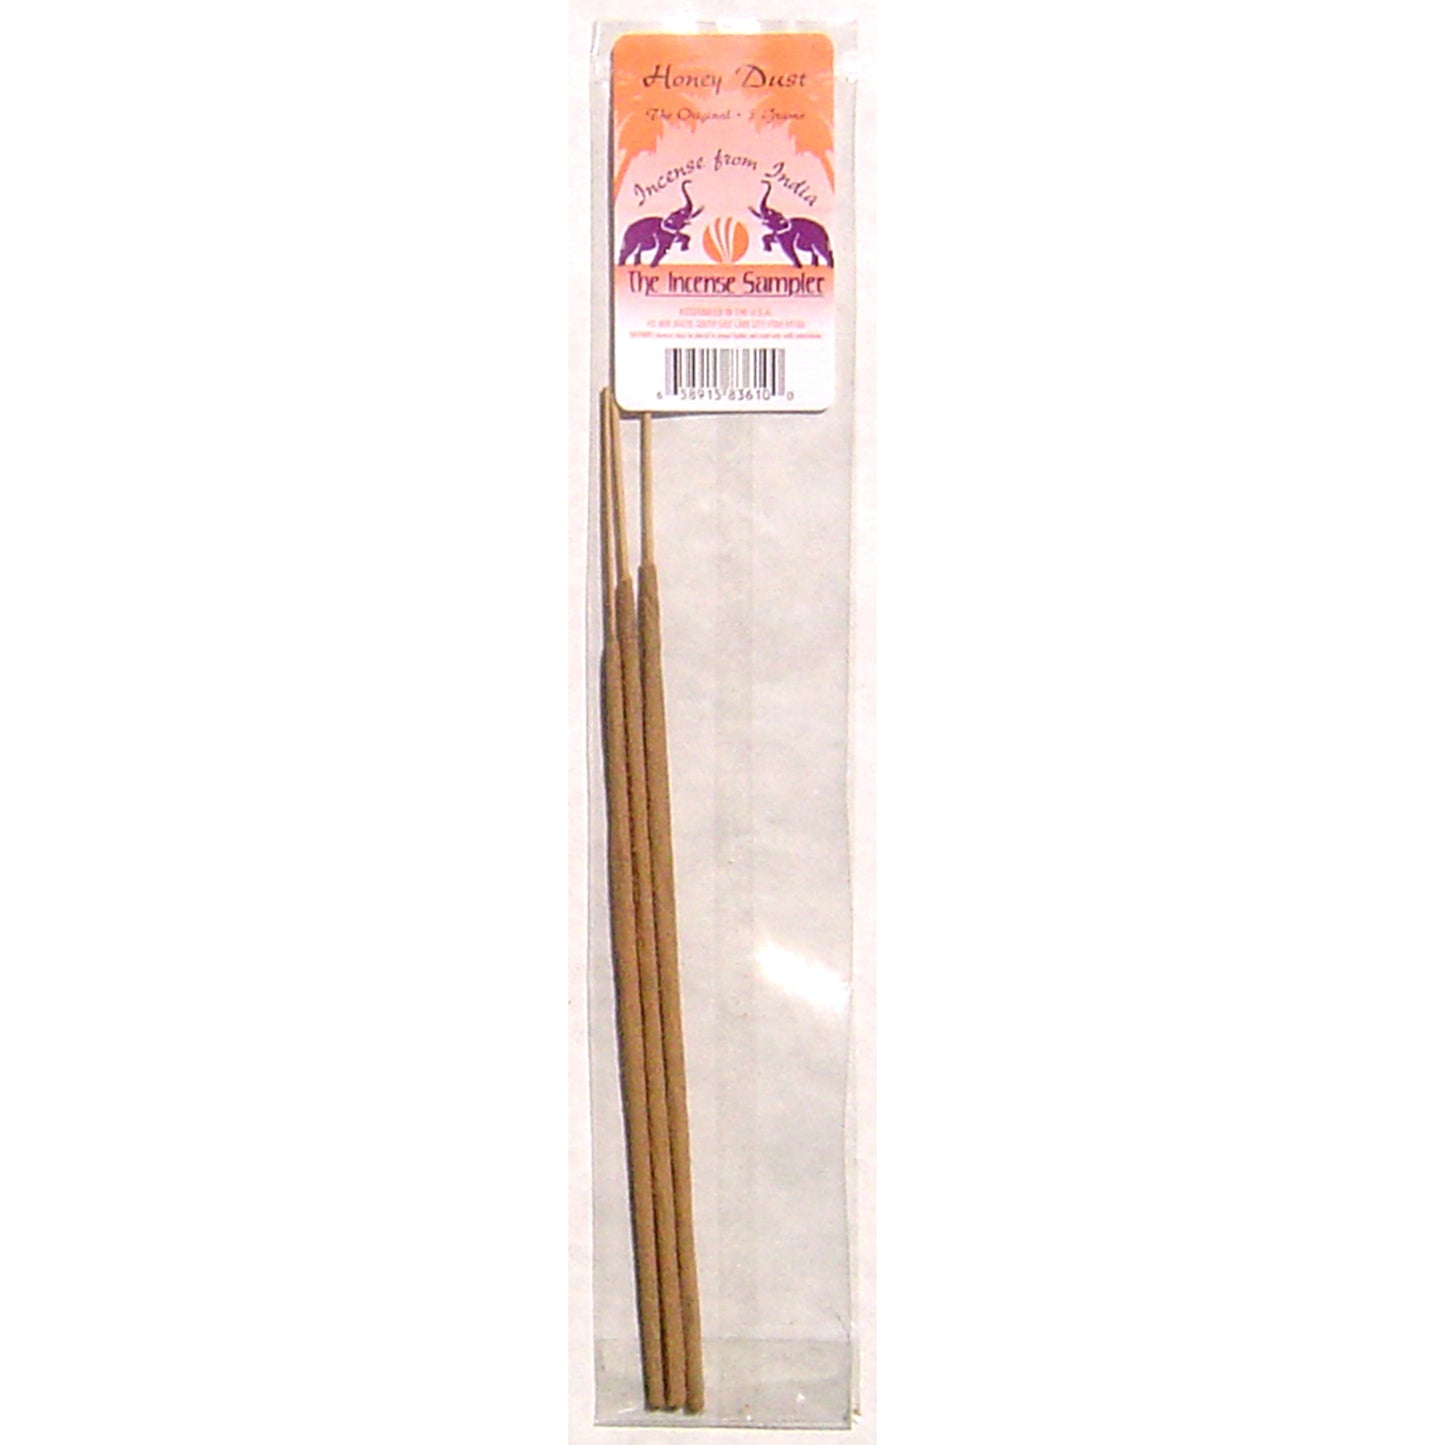 Incense From India - Honey Dust